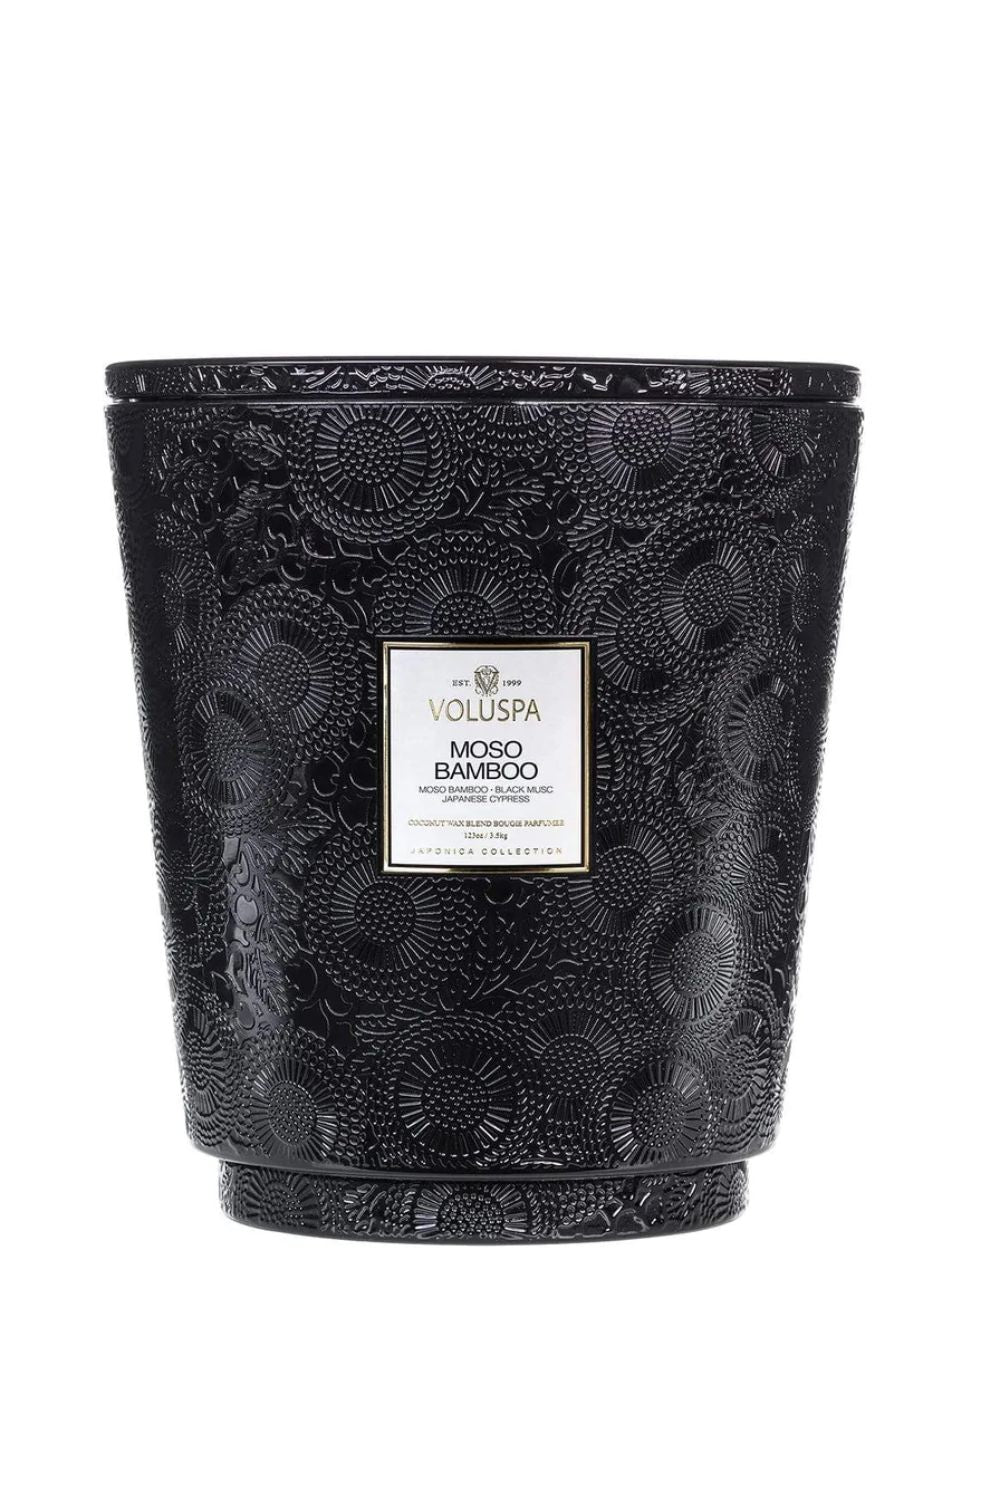 Moso Bamboo 250hr Hearth Candle